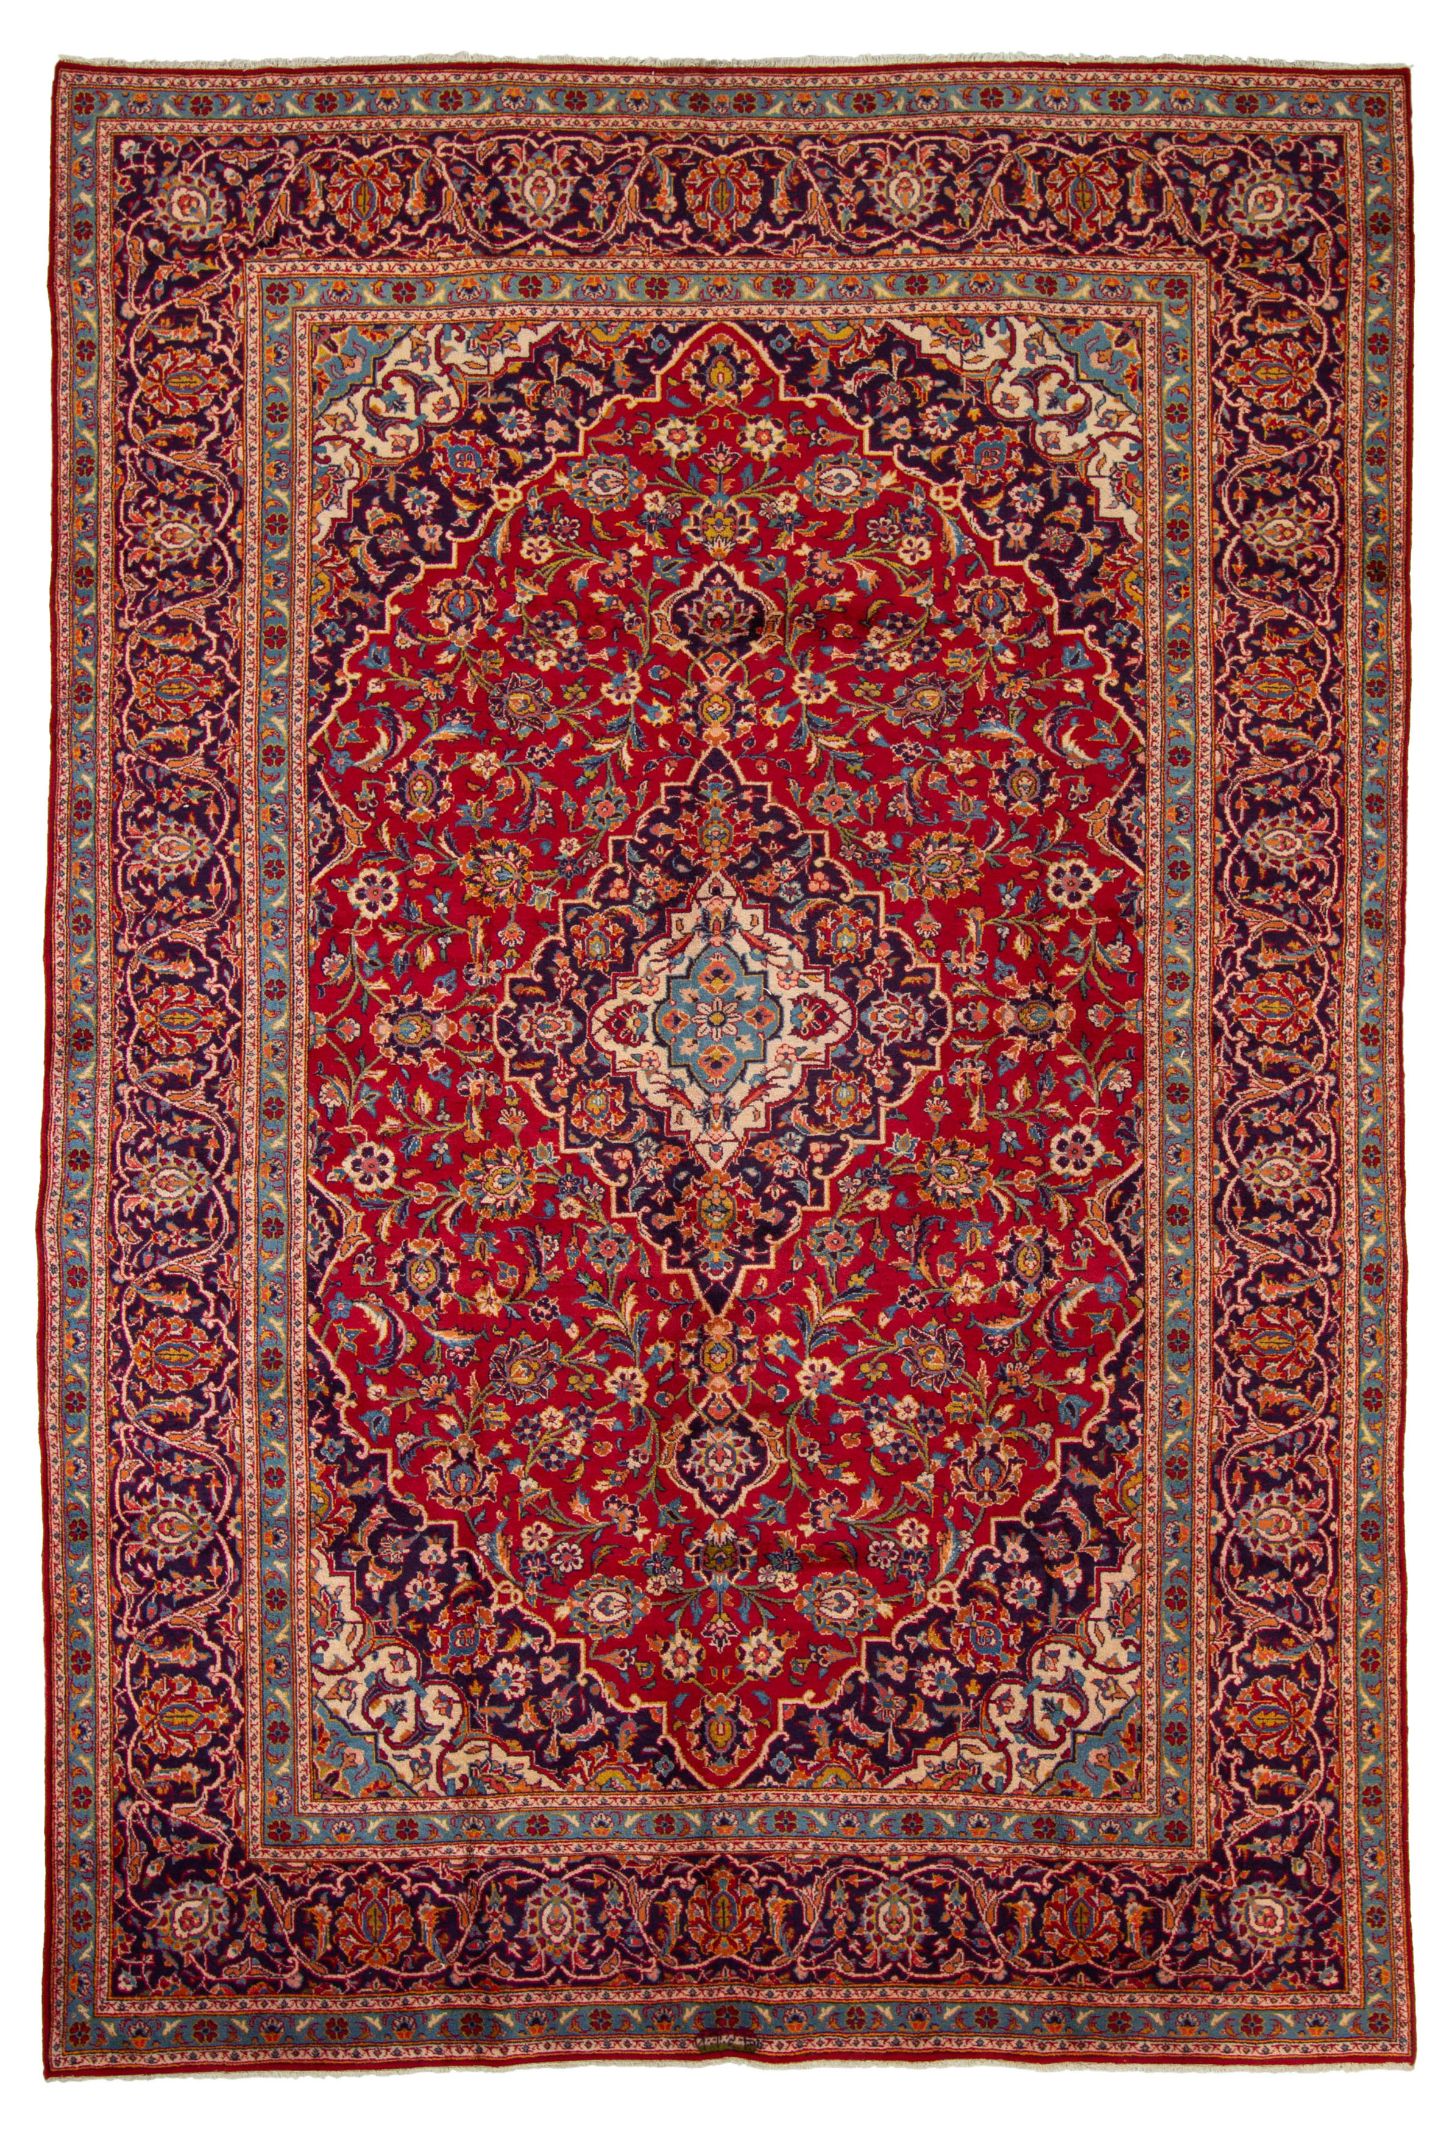 Hand-knotted>Iran>Kashan (18) Size: 7'7" x 10'11"  